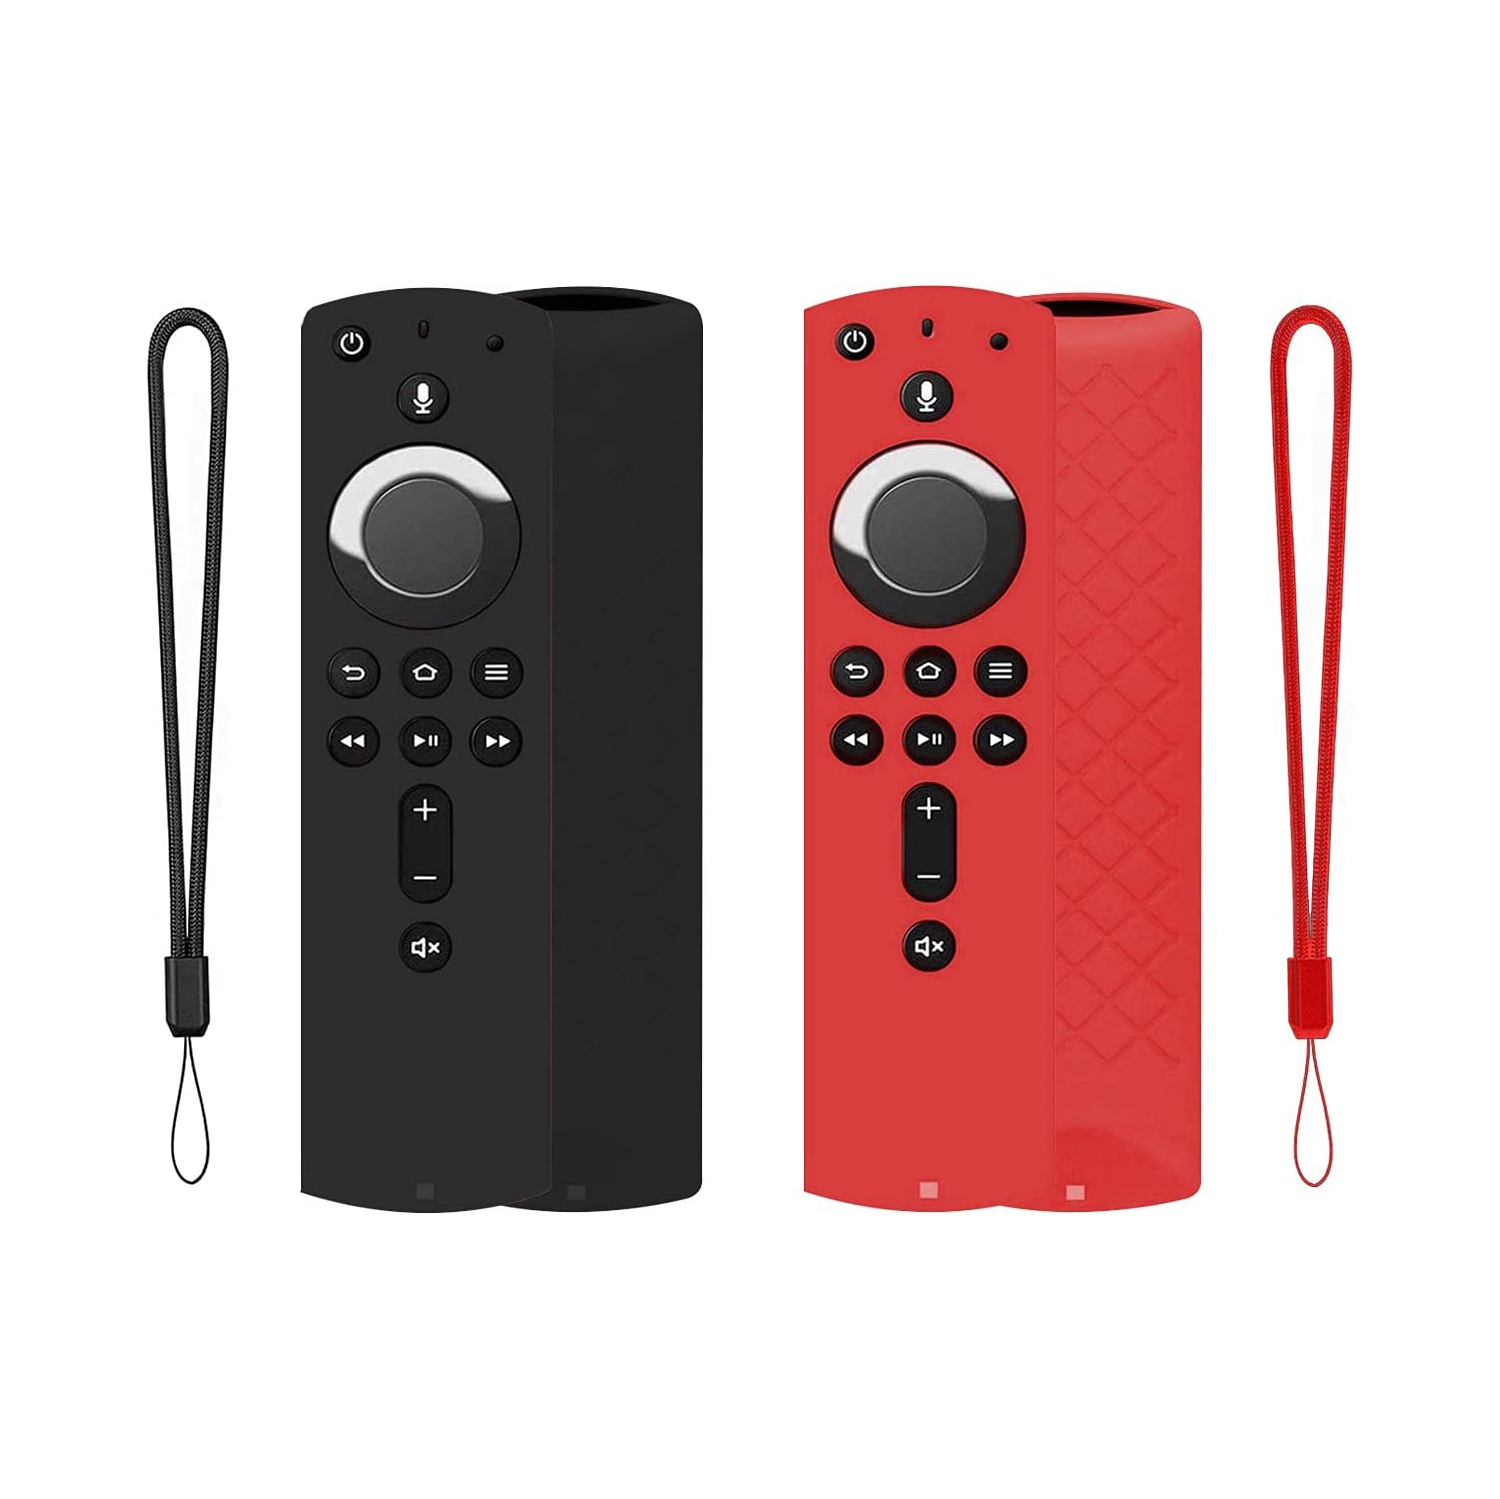 Shockproof Protective Silicone Case/Covers Compatible with All-New Alexa Voice Remote for Fire TV Stick 4K, Fire TV Stick (2nd Gen), Fire TV (3rd Gen) - Black/Red